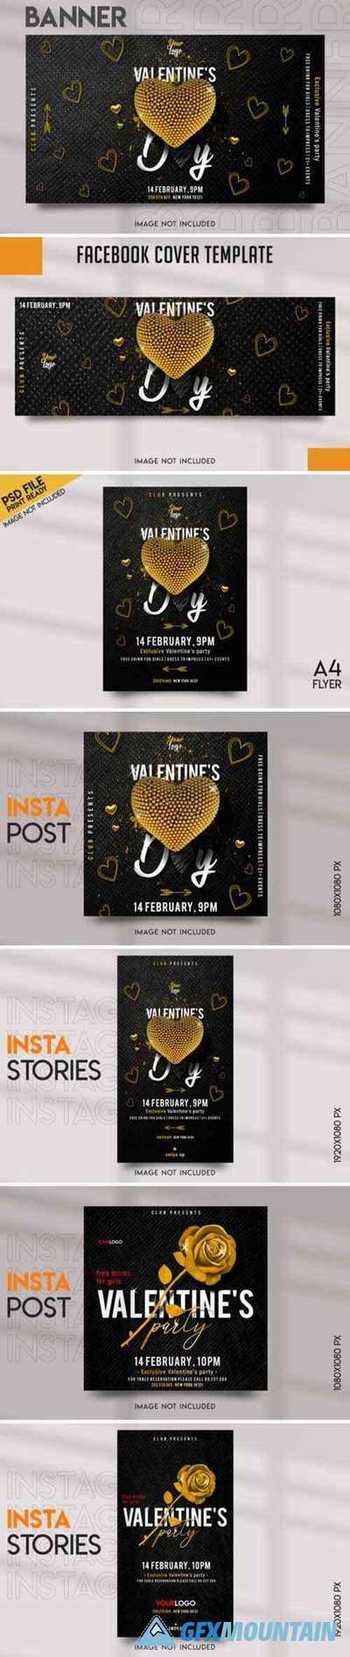 Valentines Party Social Media Template